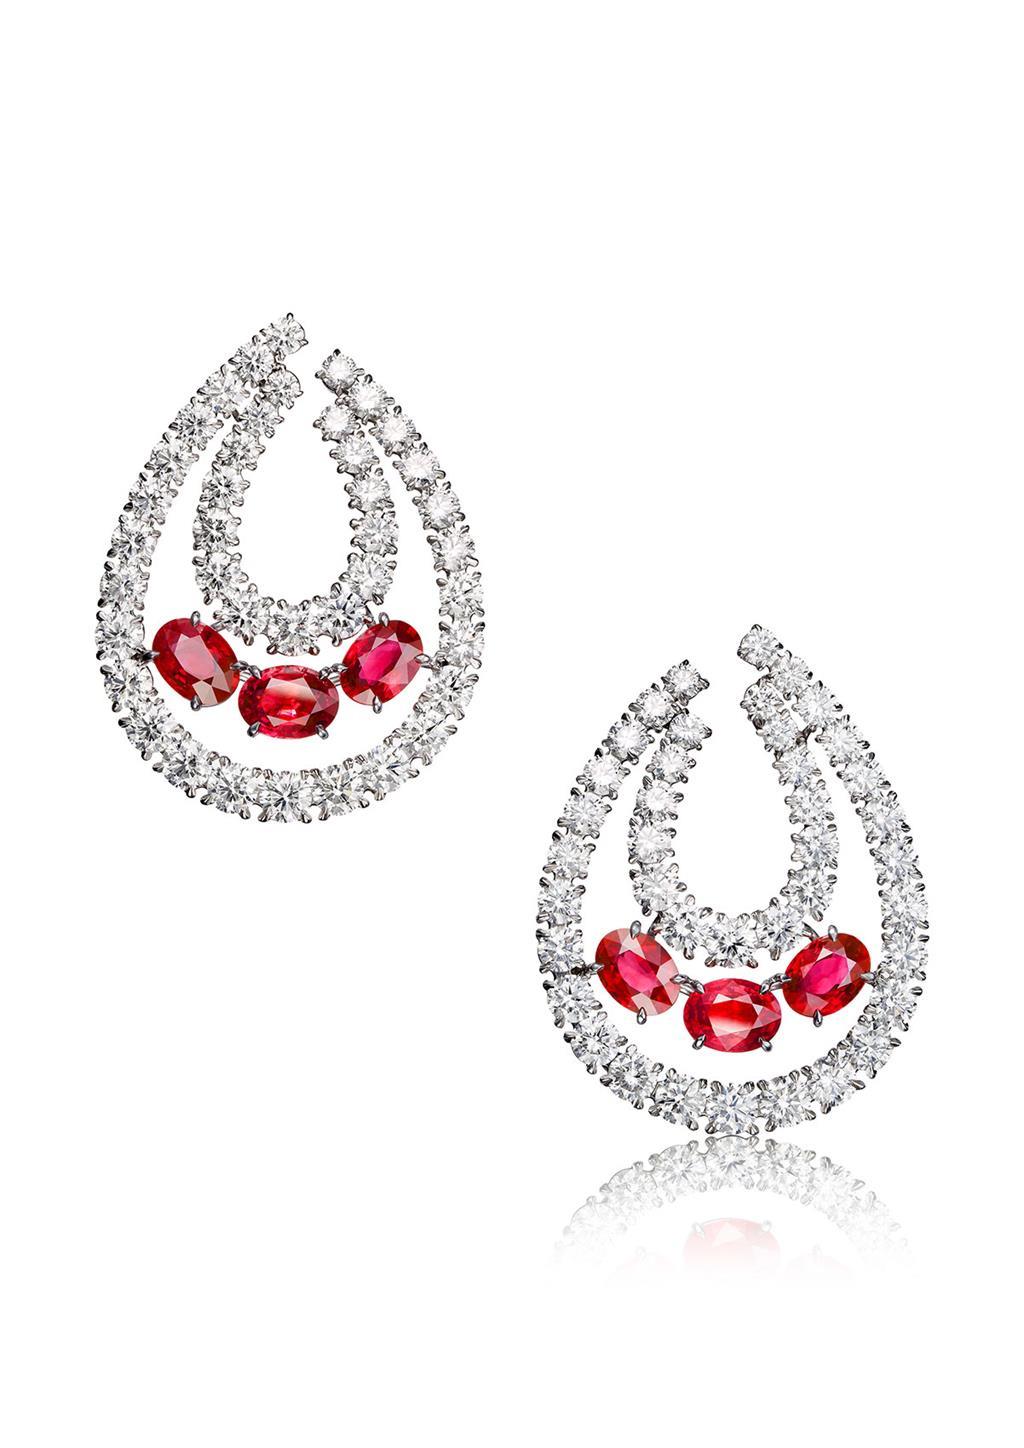 Earrings "L'Automne" - White gold set with 6 oval cut rubies and 80 diamonds